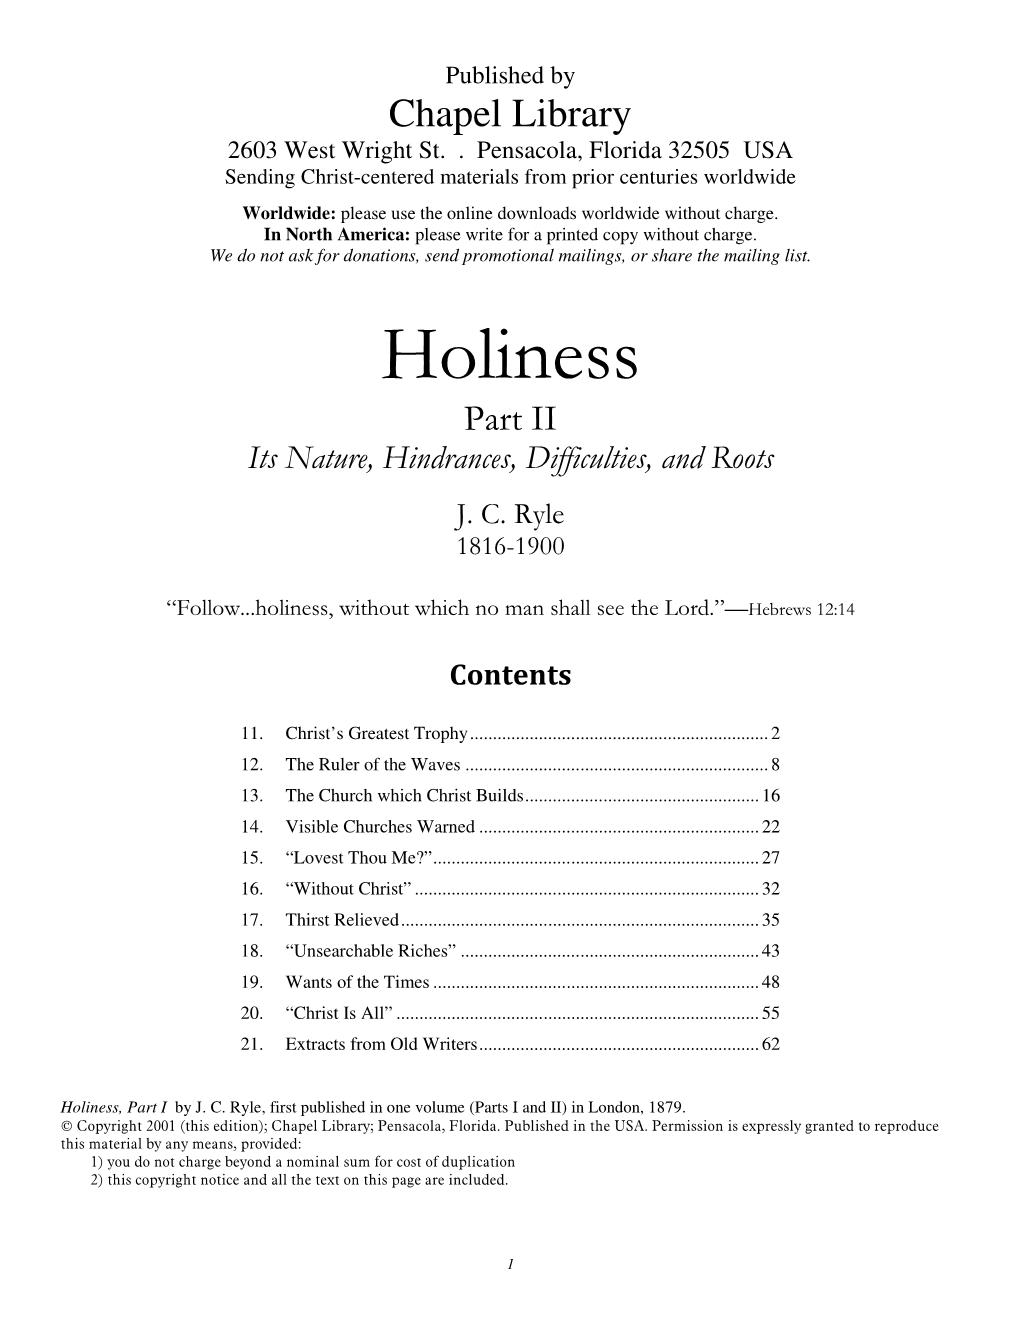 Holiness Part II Its Nature, Hindrances, Difficulties, and Roots